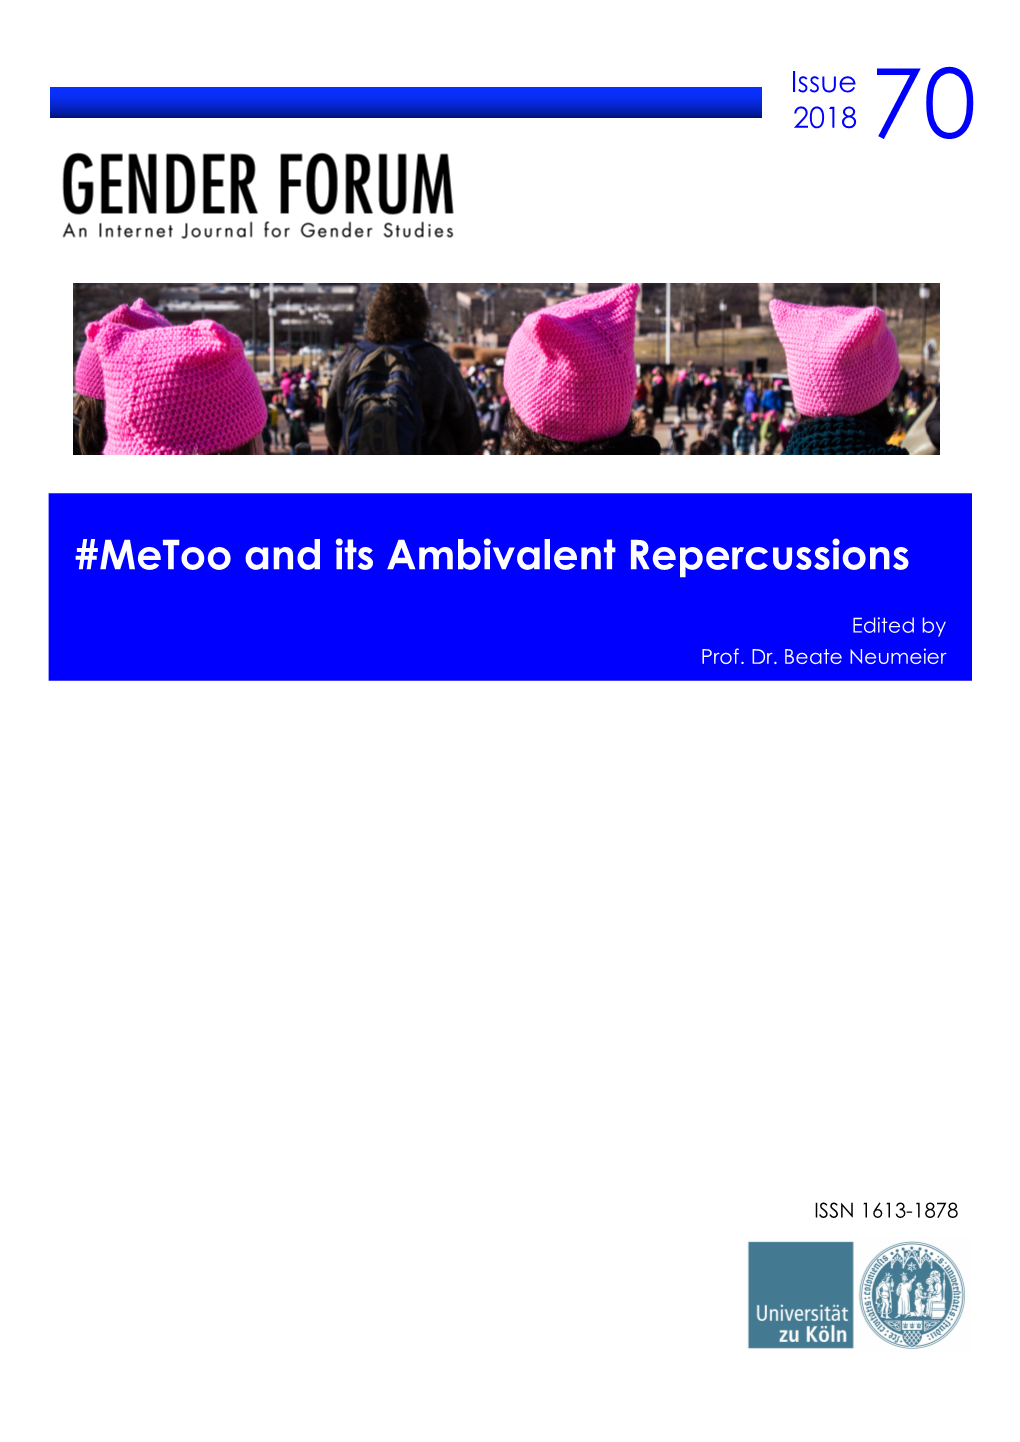 Metoo and Its Ambivalent Repercussions